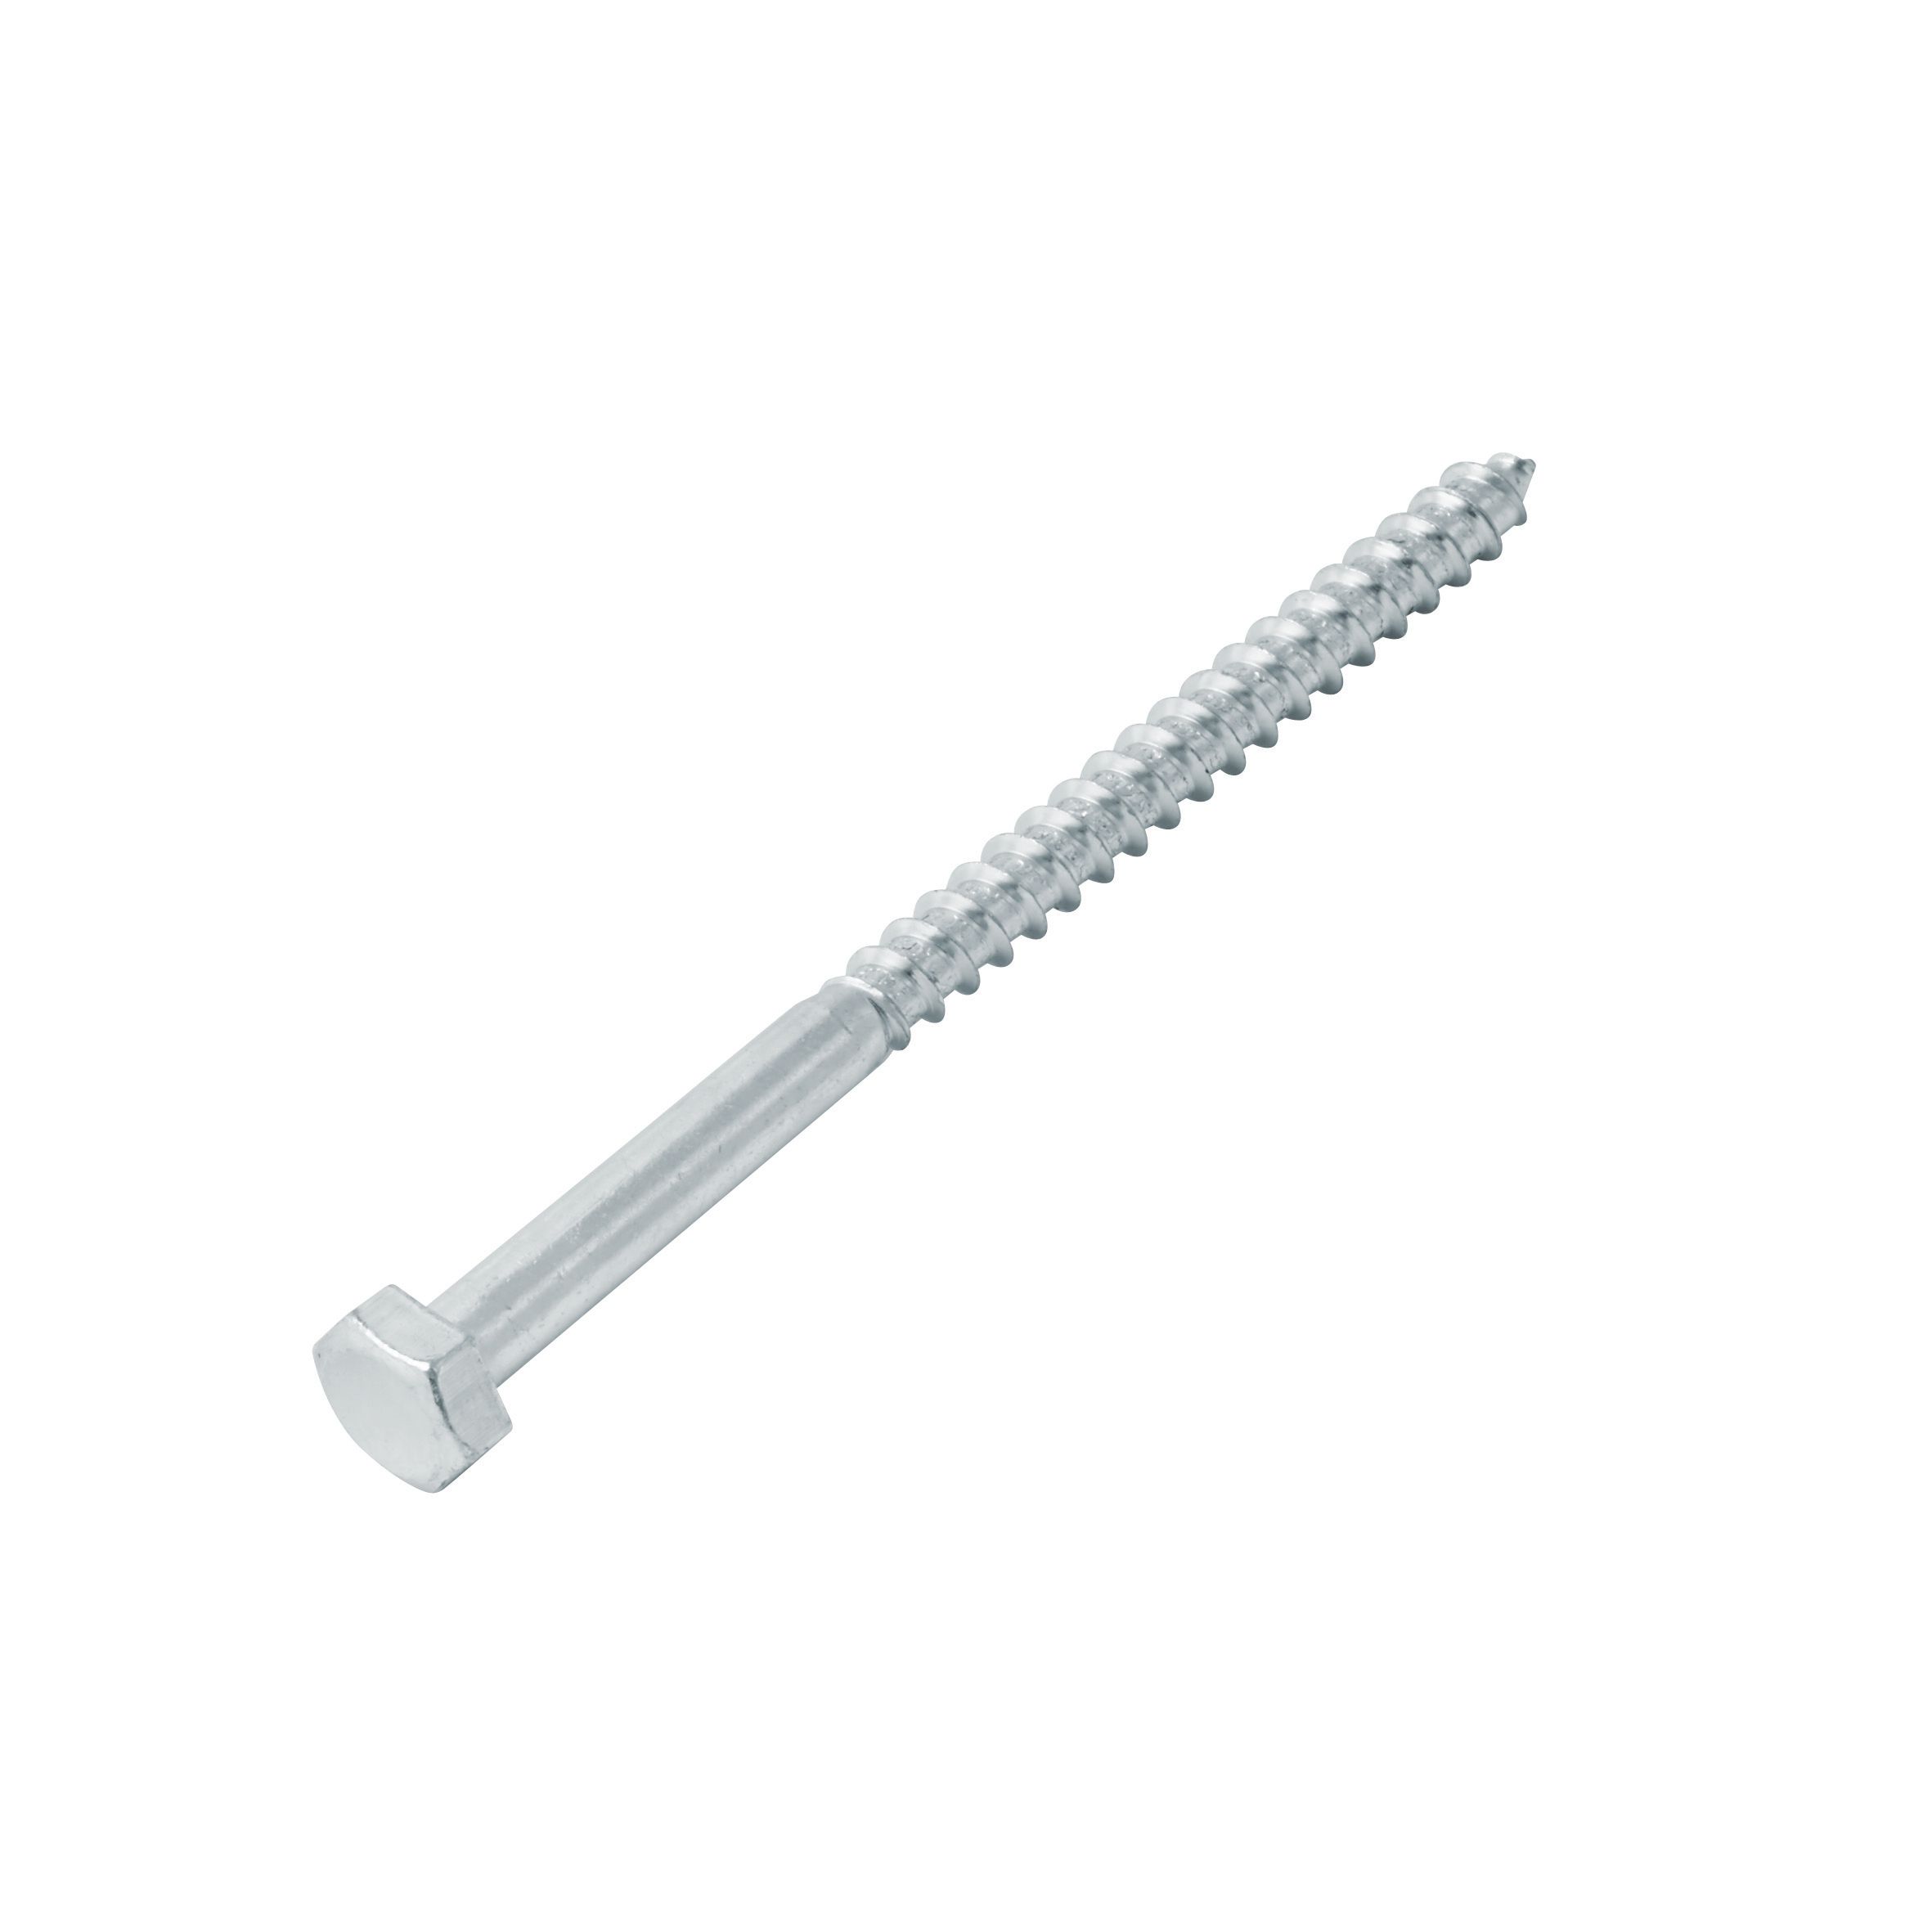 Image of Wickes Coach Screws - M10 x 150mm Pack of 4